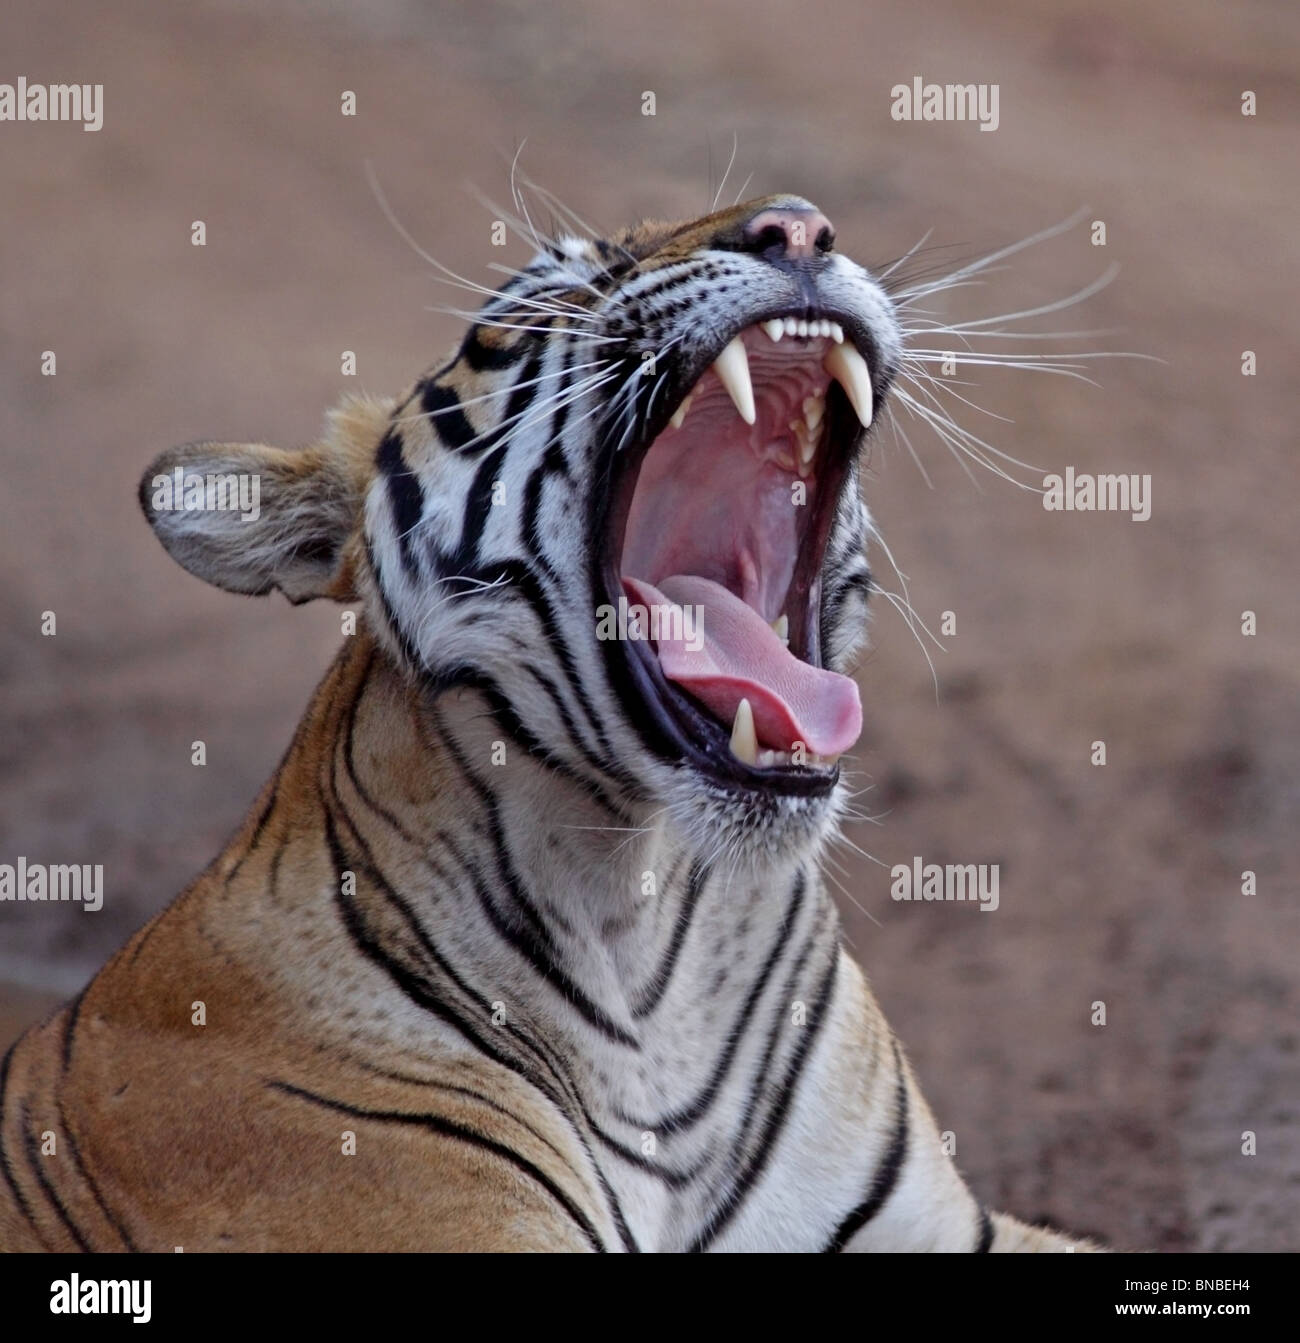 Tiger yawns wide and shows its canines in Ranthambhore National Park, India Stock Photo